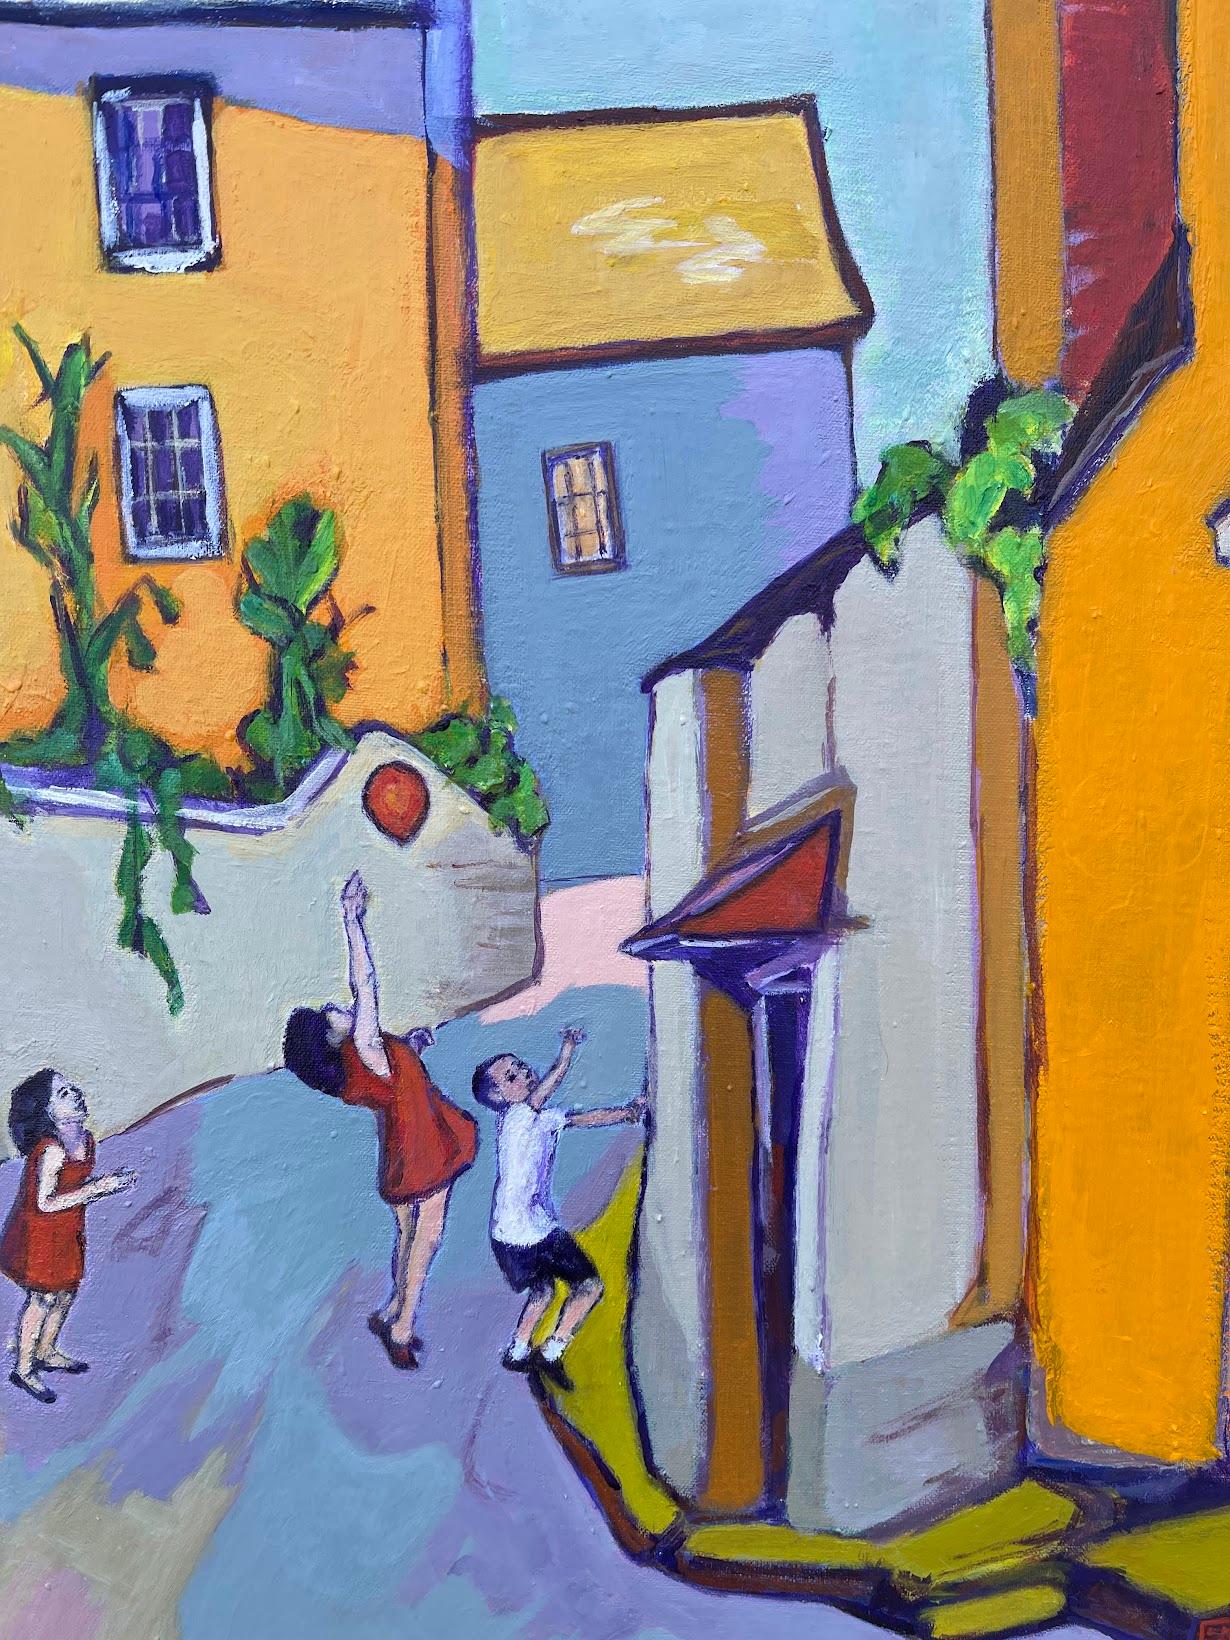 Kids Playing with Balloon, Original Painting 1